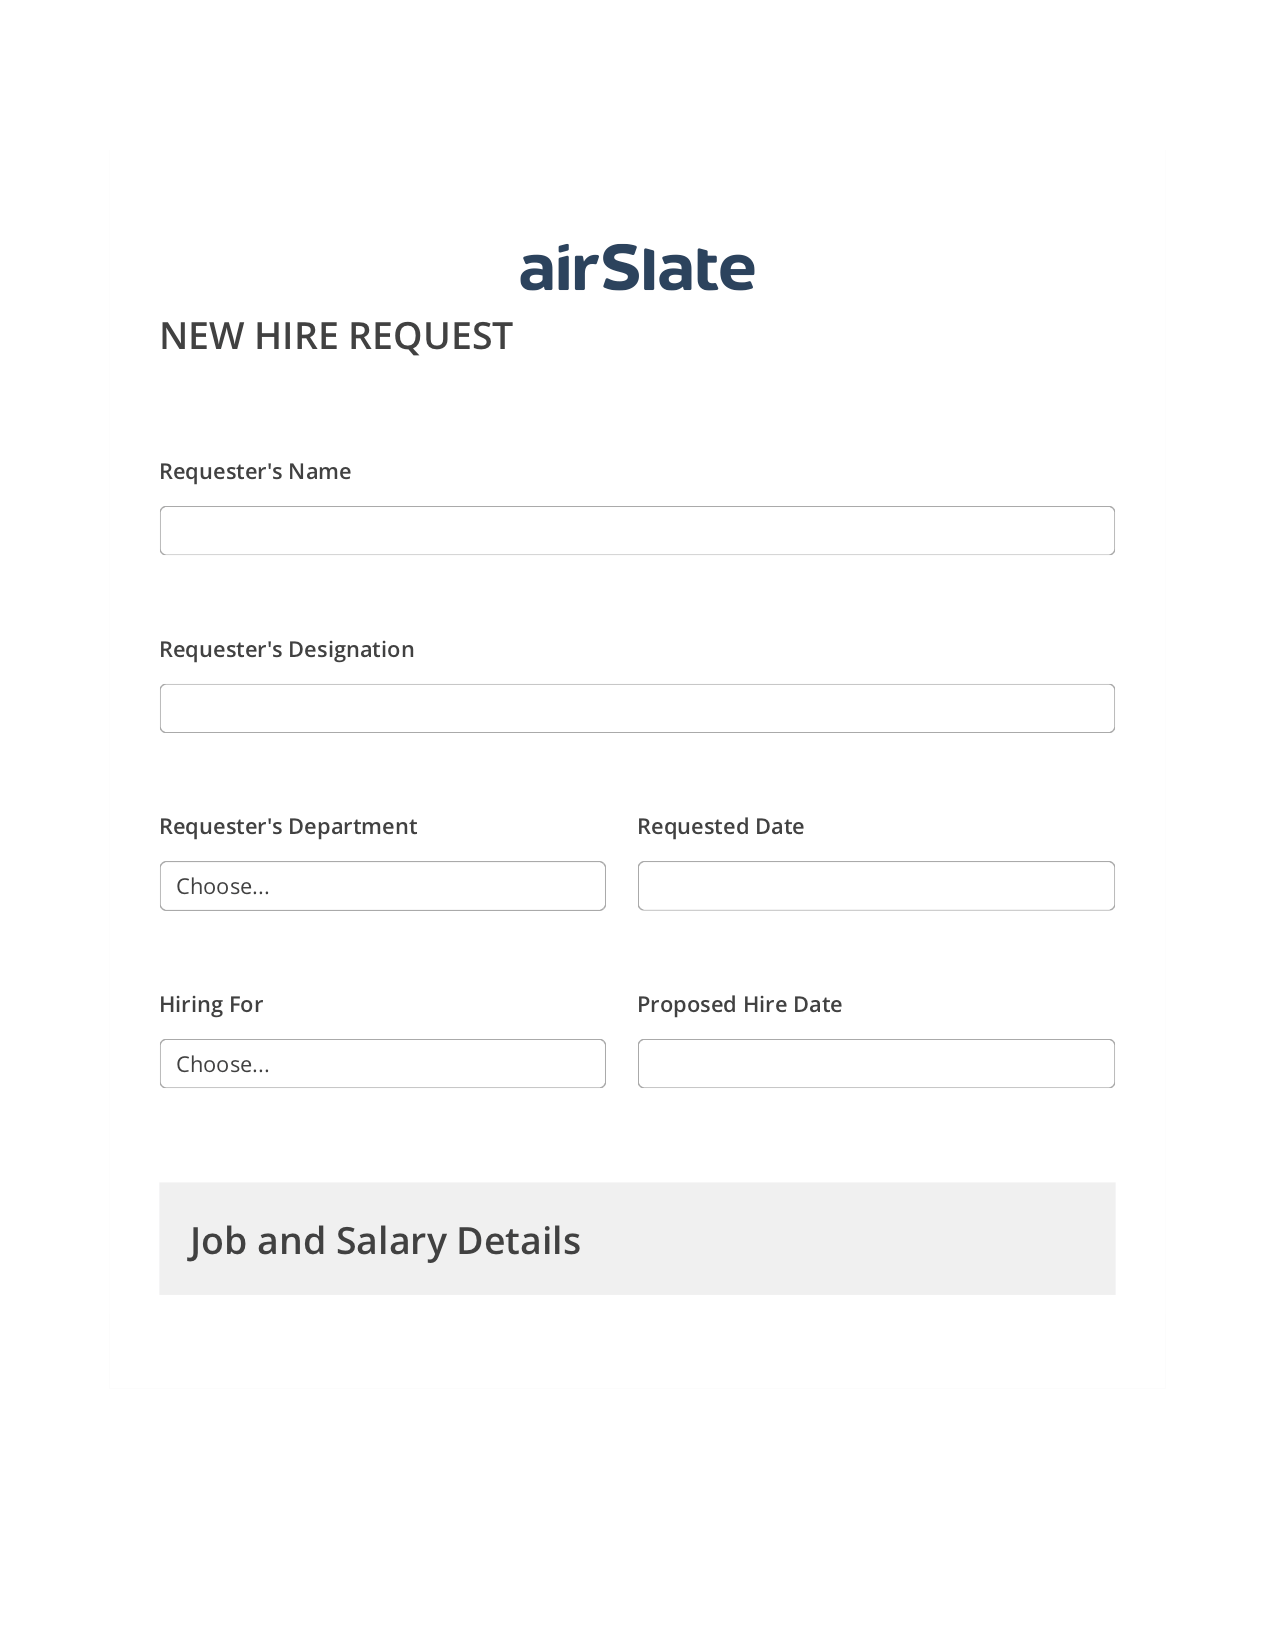 Hiring Request Workflow Pre-fill from Salesforce Records Bot, Create MS Dynamics 365 Records Bot, Export to Excel 365 Bot